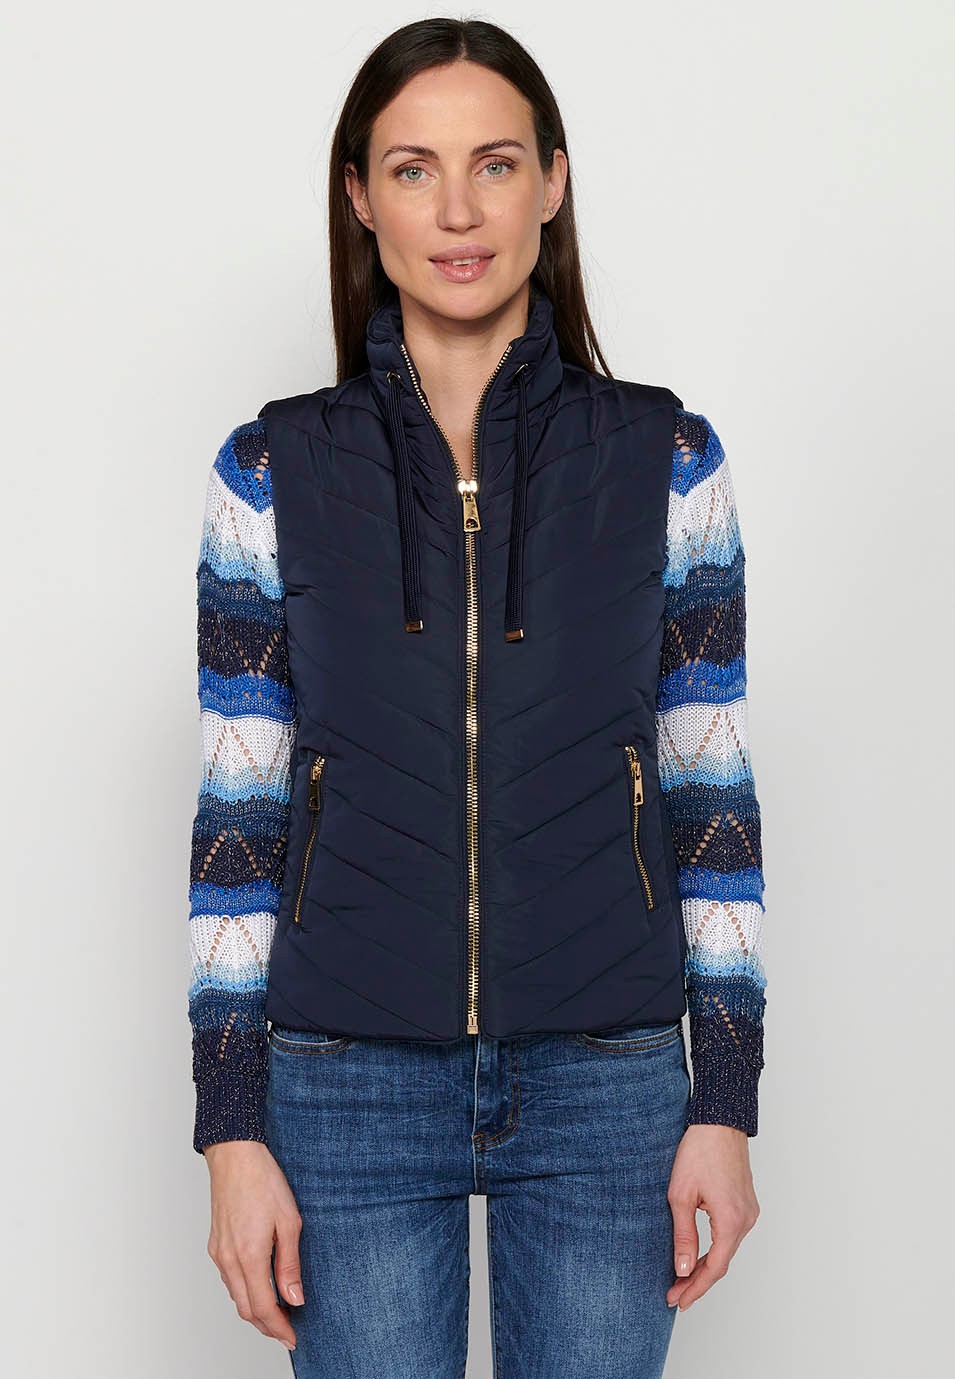 Padded vest with adjustable high neck with drawstring and front zipper closure in Navy for Women